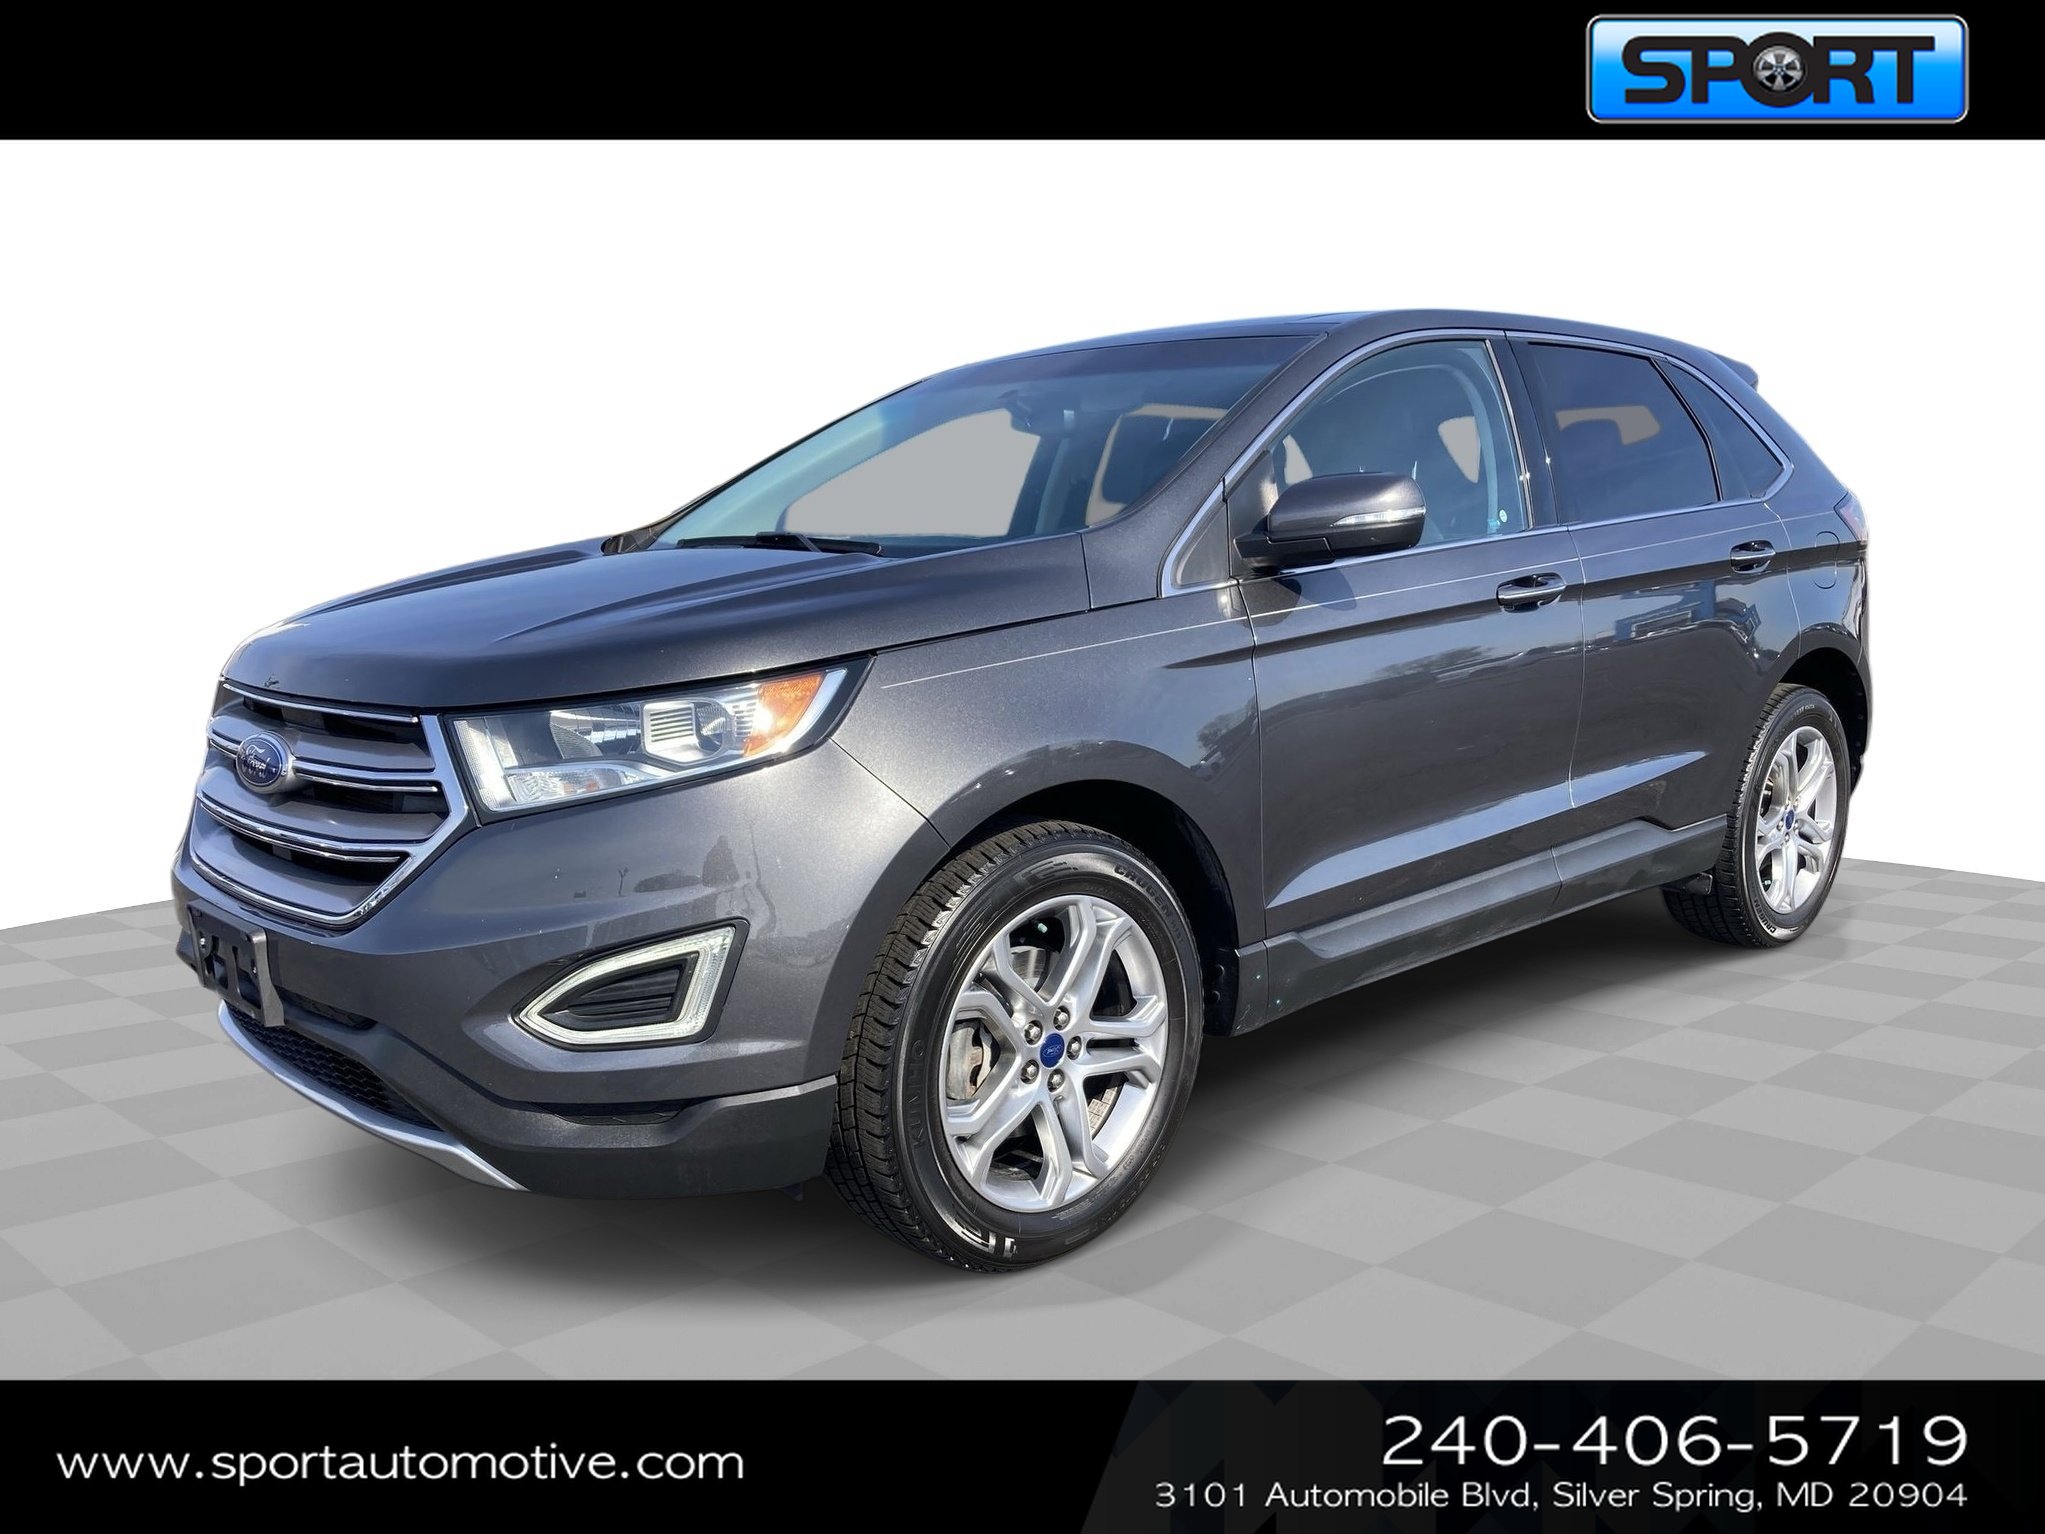 2017 Ford Edge Silver Spring MD